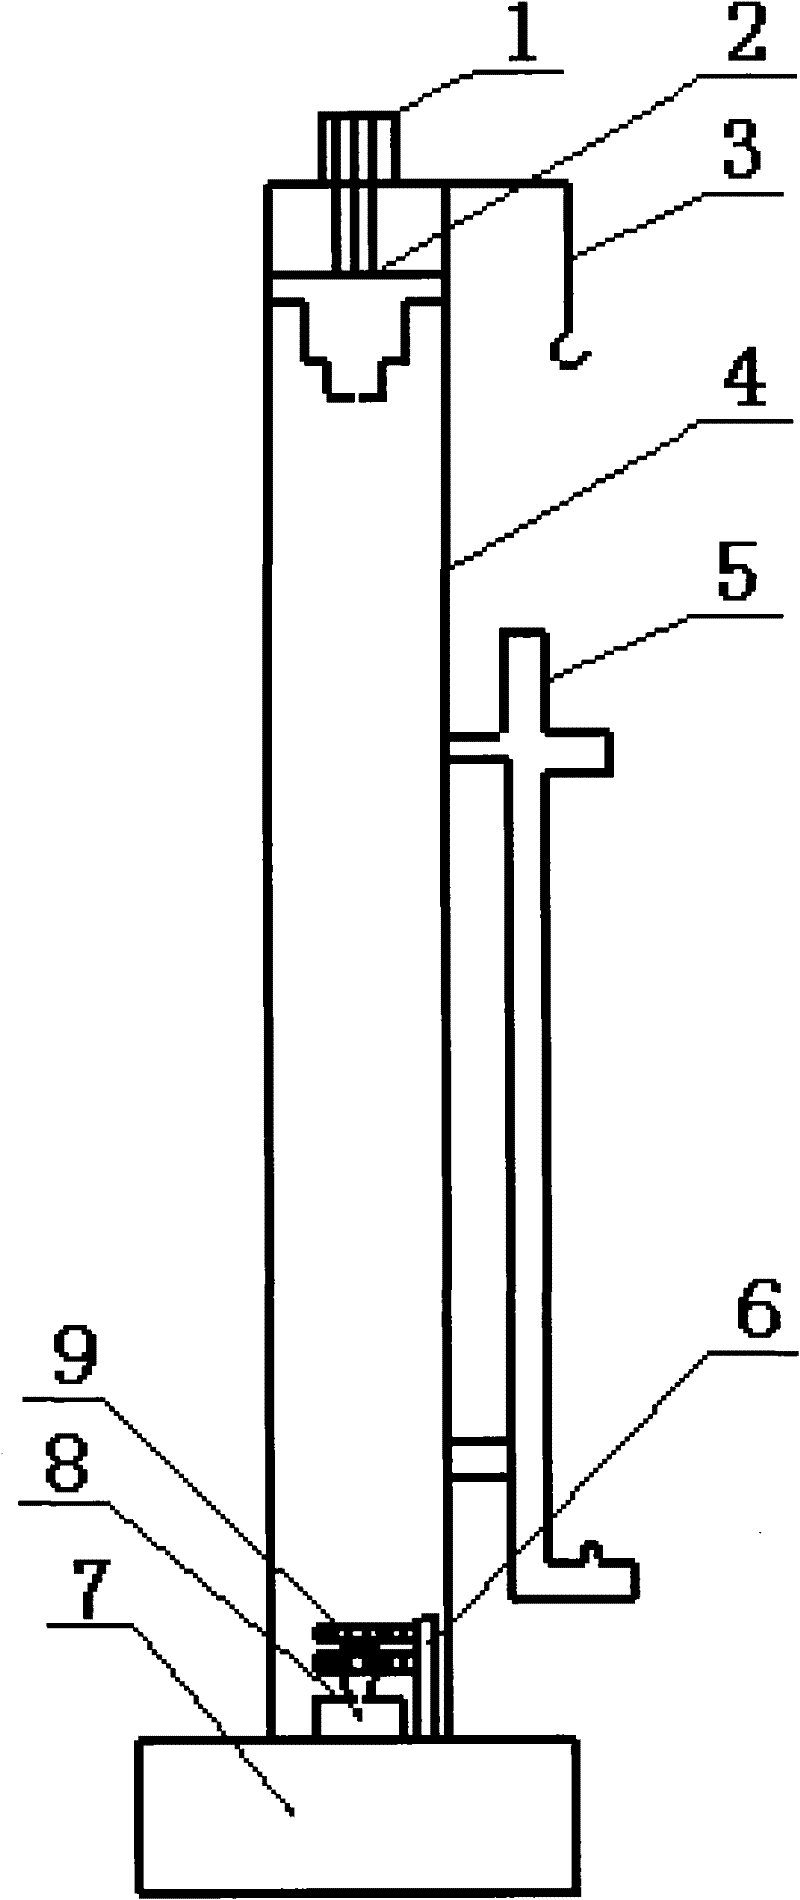 Tripping method for operation by adopting power swivel and tool